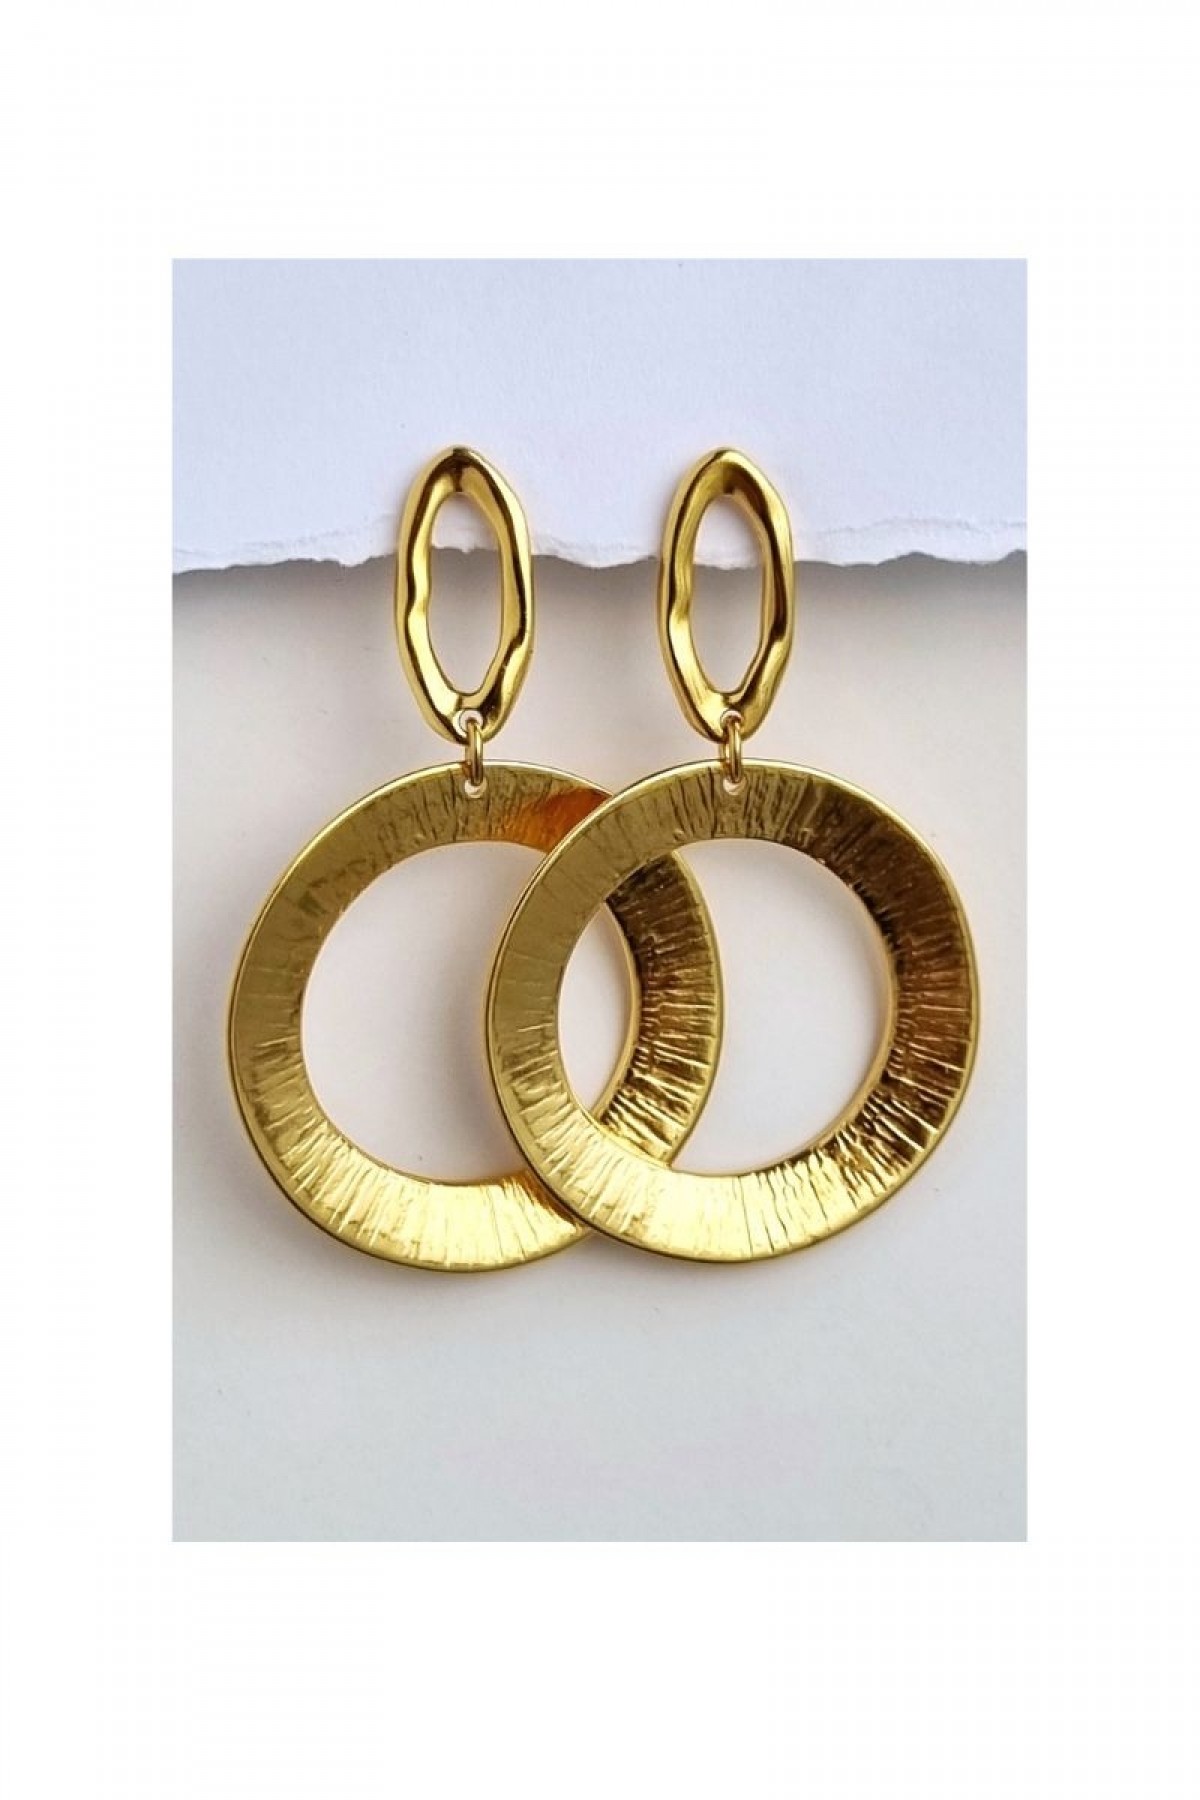 GOLD PLATED CIRCLE EARRINGS by Eve Kay